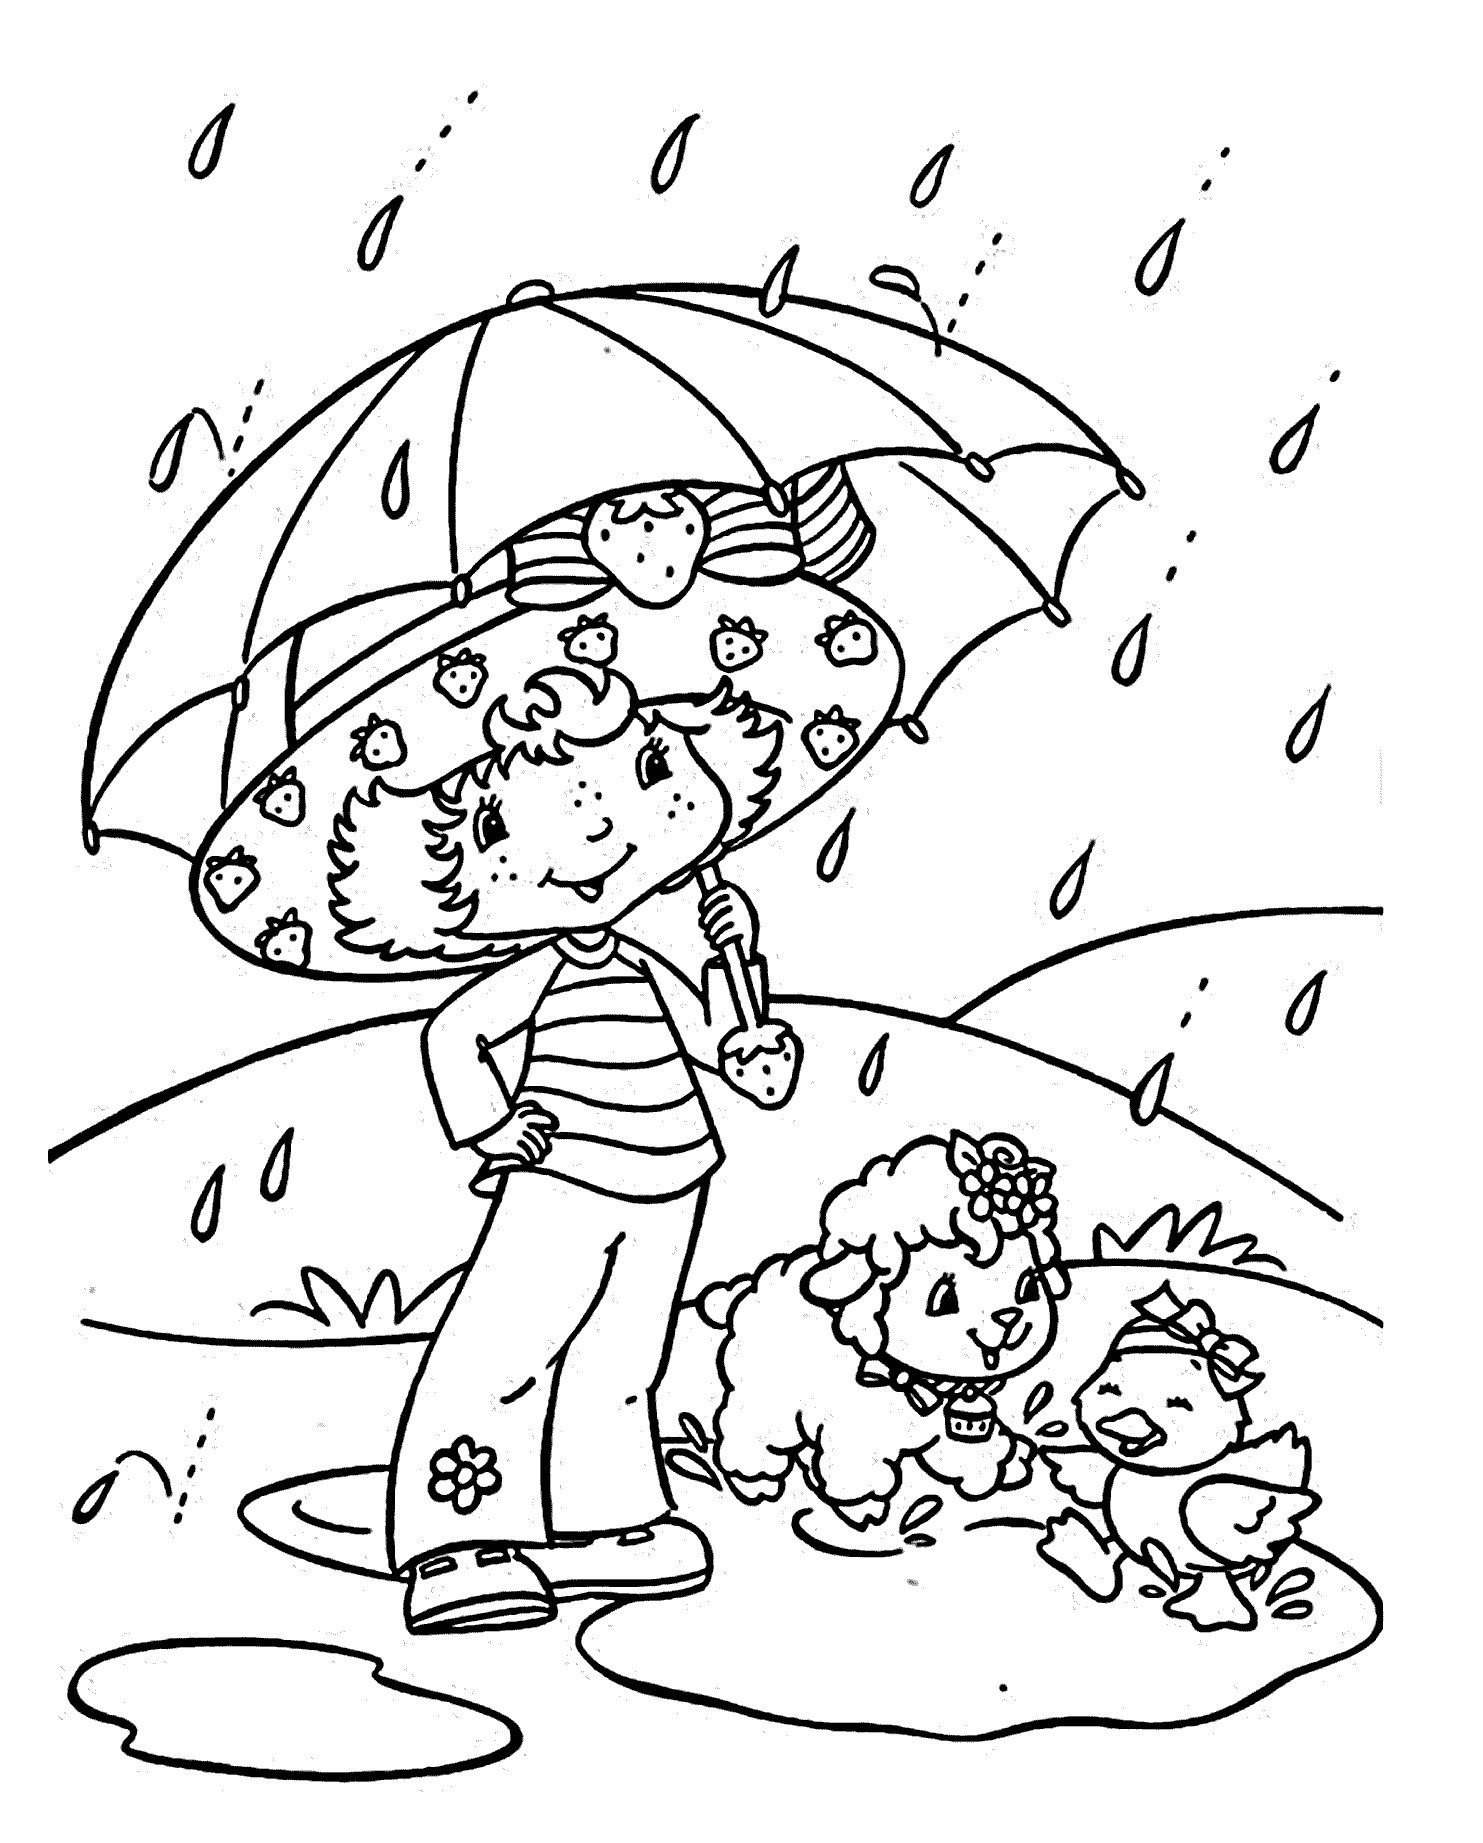 Rainy Day Coloring Pages April Showers For Toddlers Rain Preschoolers Free  Printable Raindrops – Approachingtheelephant